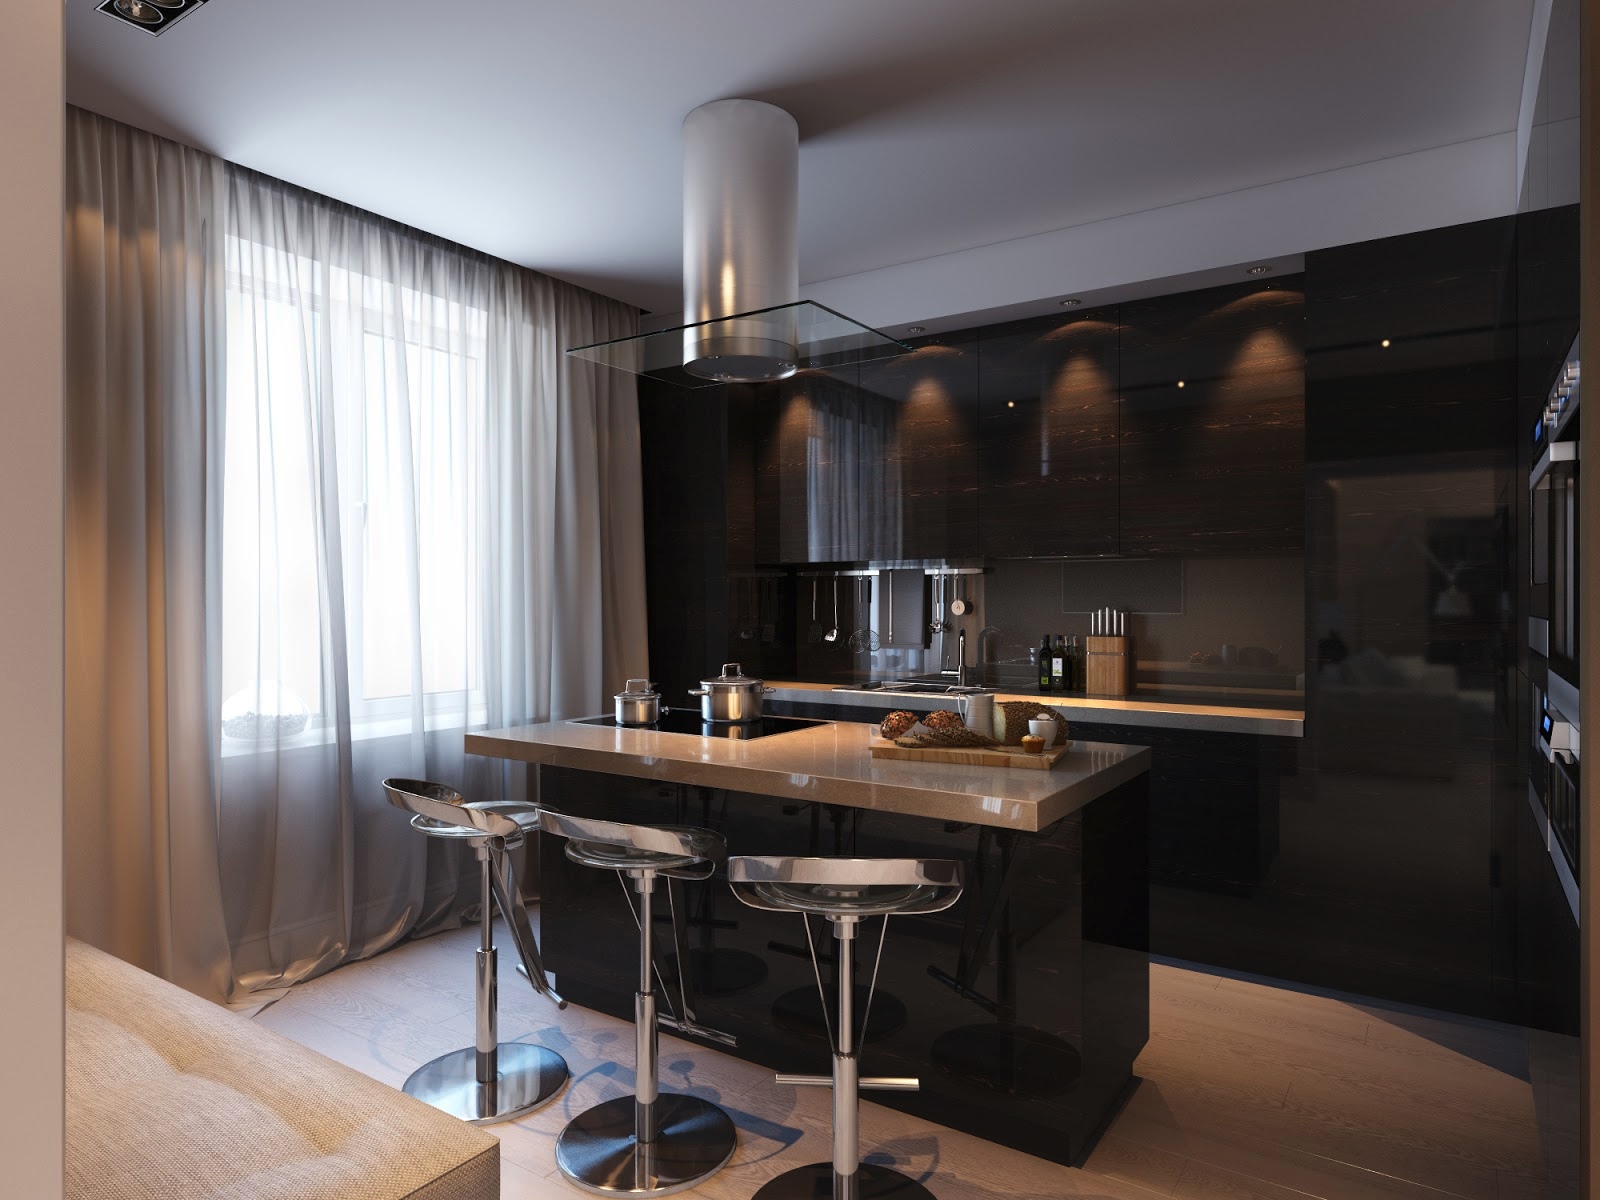 Minimalist kitchen with black color "width =" 1600 "height =" 1200 "srcset =" https://mileray.com/wp-content/uploads/2020/05/1588512720_472_2-Minimalist-Kitchen-Design-That-Will-Stunning-You-By-Artem.jpeg 1600w, https: //mileray.com/wp-content/uploads/2016/06/22-Metal-bar-stool-300x225.jpeg 300w, https://mileray.com/wp-content/uploads/2016/06/22-Metal -bar-stool-768x576.jpeg 768w, https://mileray.com/wp-content/uploads/2016/06/22-Metal-bar-stool-1024x768.jpeg 1024w, https://mileray.com/wp -content / uploads / 2016/06 / 22-Metal-Bar-Stool-80x60.jpeg 80w, https://mileray.com/wp-content/uploads/2016/06/22-Metal-bar-stool-265x198. jpeg 265w, https://mileray.com/wp-content/uploads/2016/06/22-Metal-bar-stool-696x522.jpeg 696w, https://mileray.com/wp-content/uploads/2016/ 06/22-Metal-Bar-Stool-1068x801.jpeg 1068w, https://mileray.com/wp-content/uploads/2016/06/22-Metal-bar-stool-560x420.jpeg 560w "sizes =" ( maximum width: 1600px) 100vw, 1600px